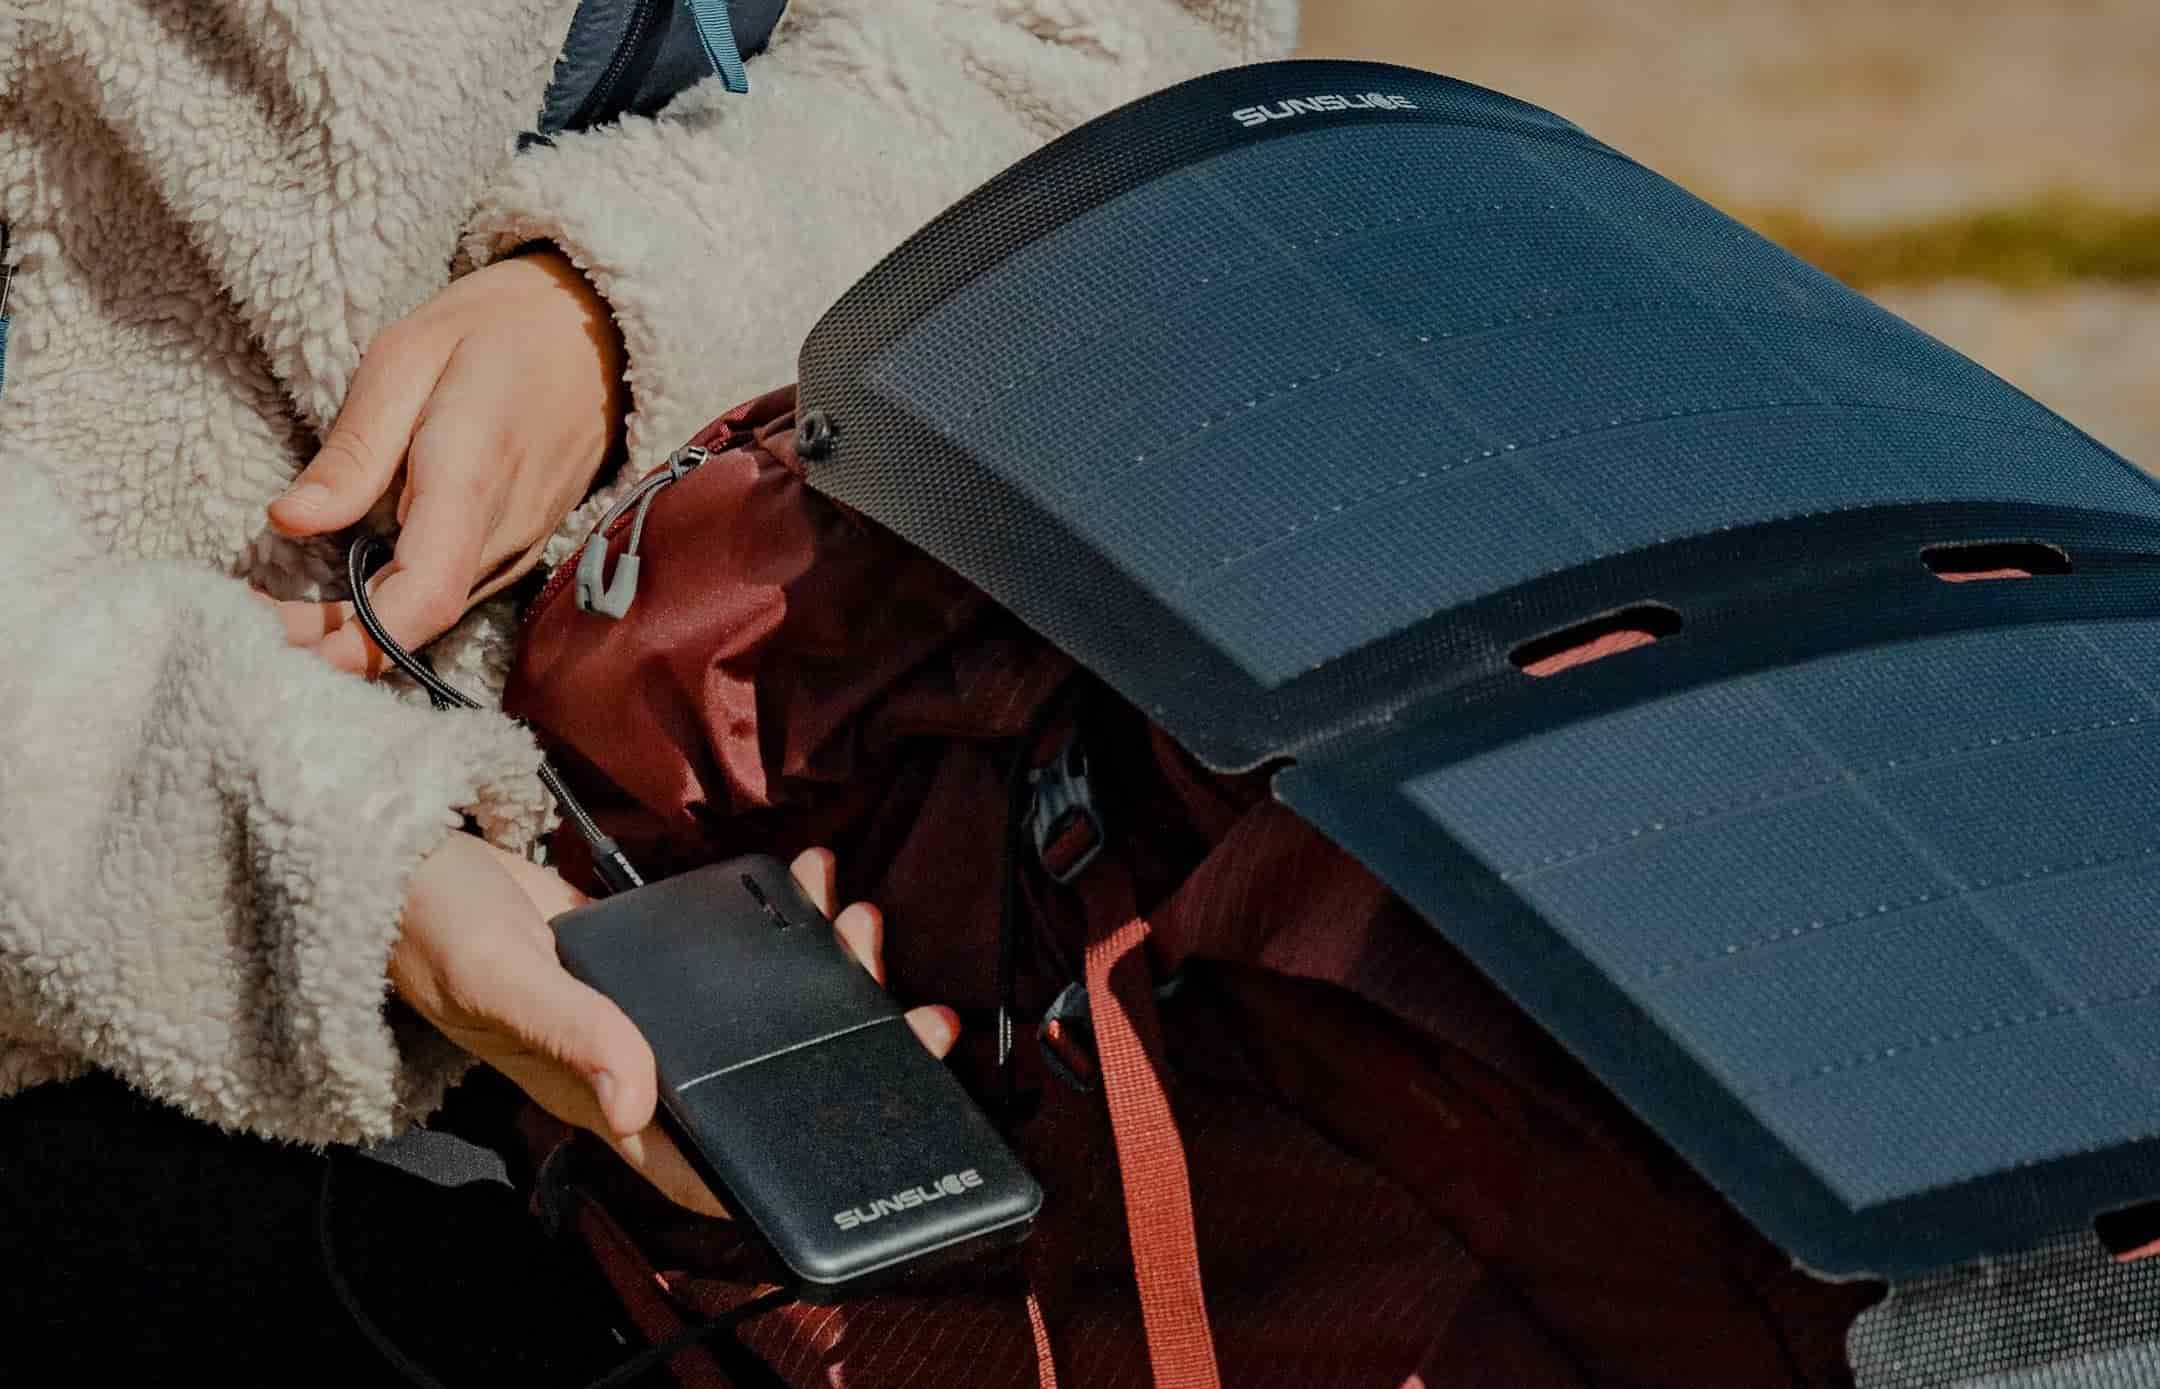 portable solar panel for camping connected to an external battery on a backpack